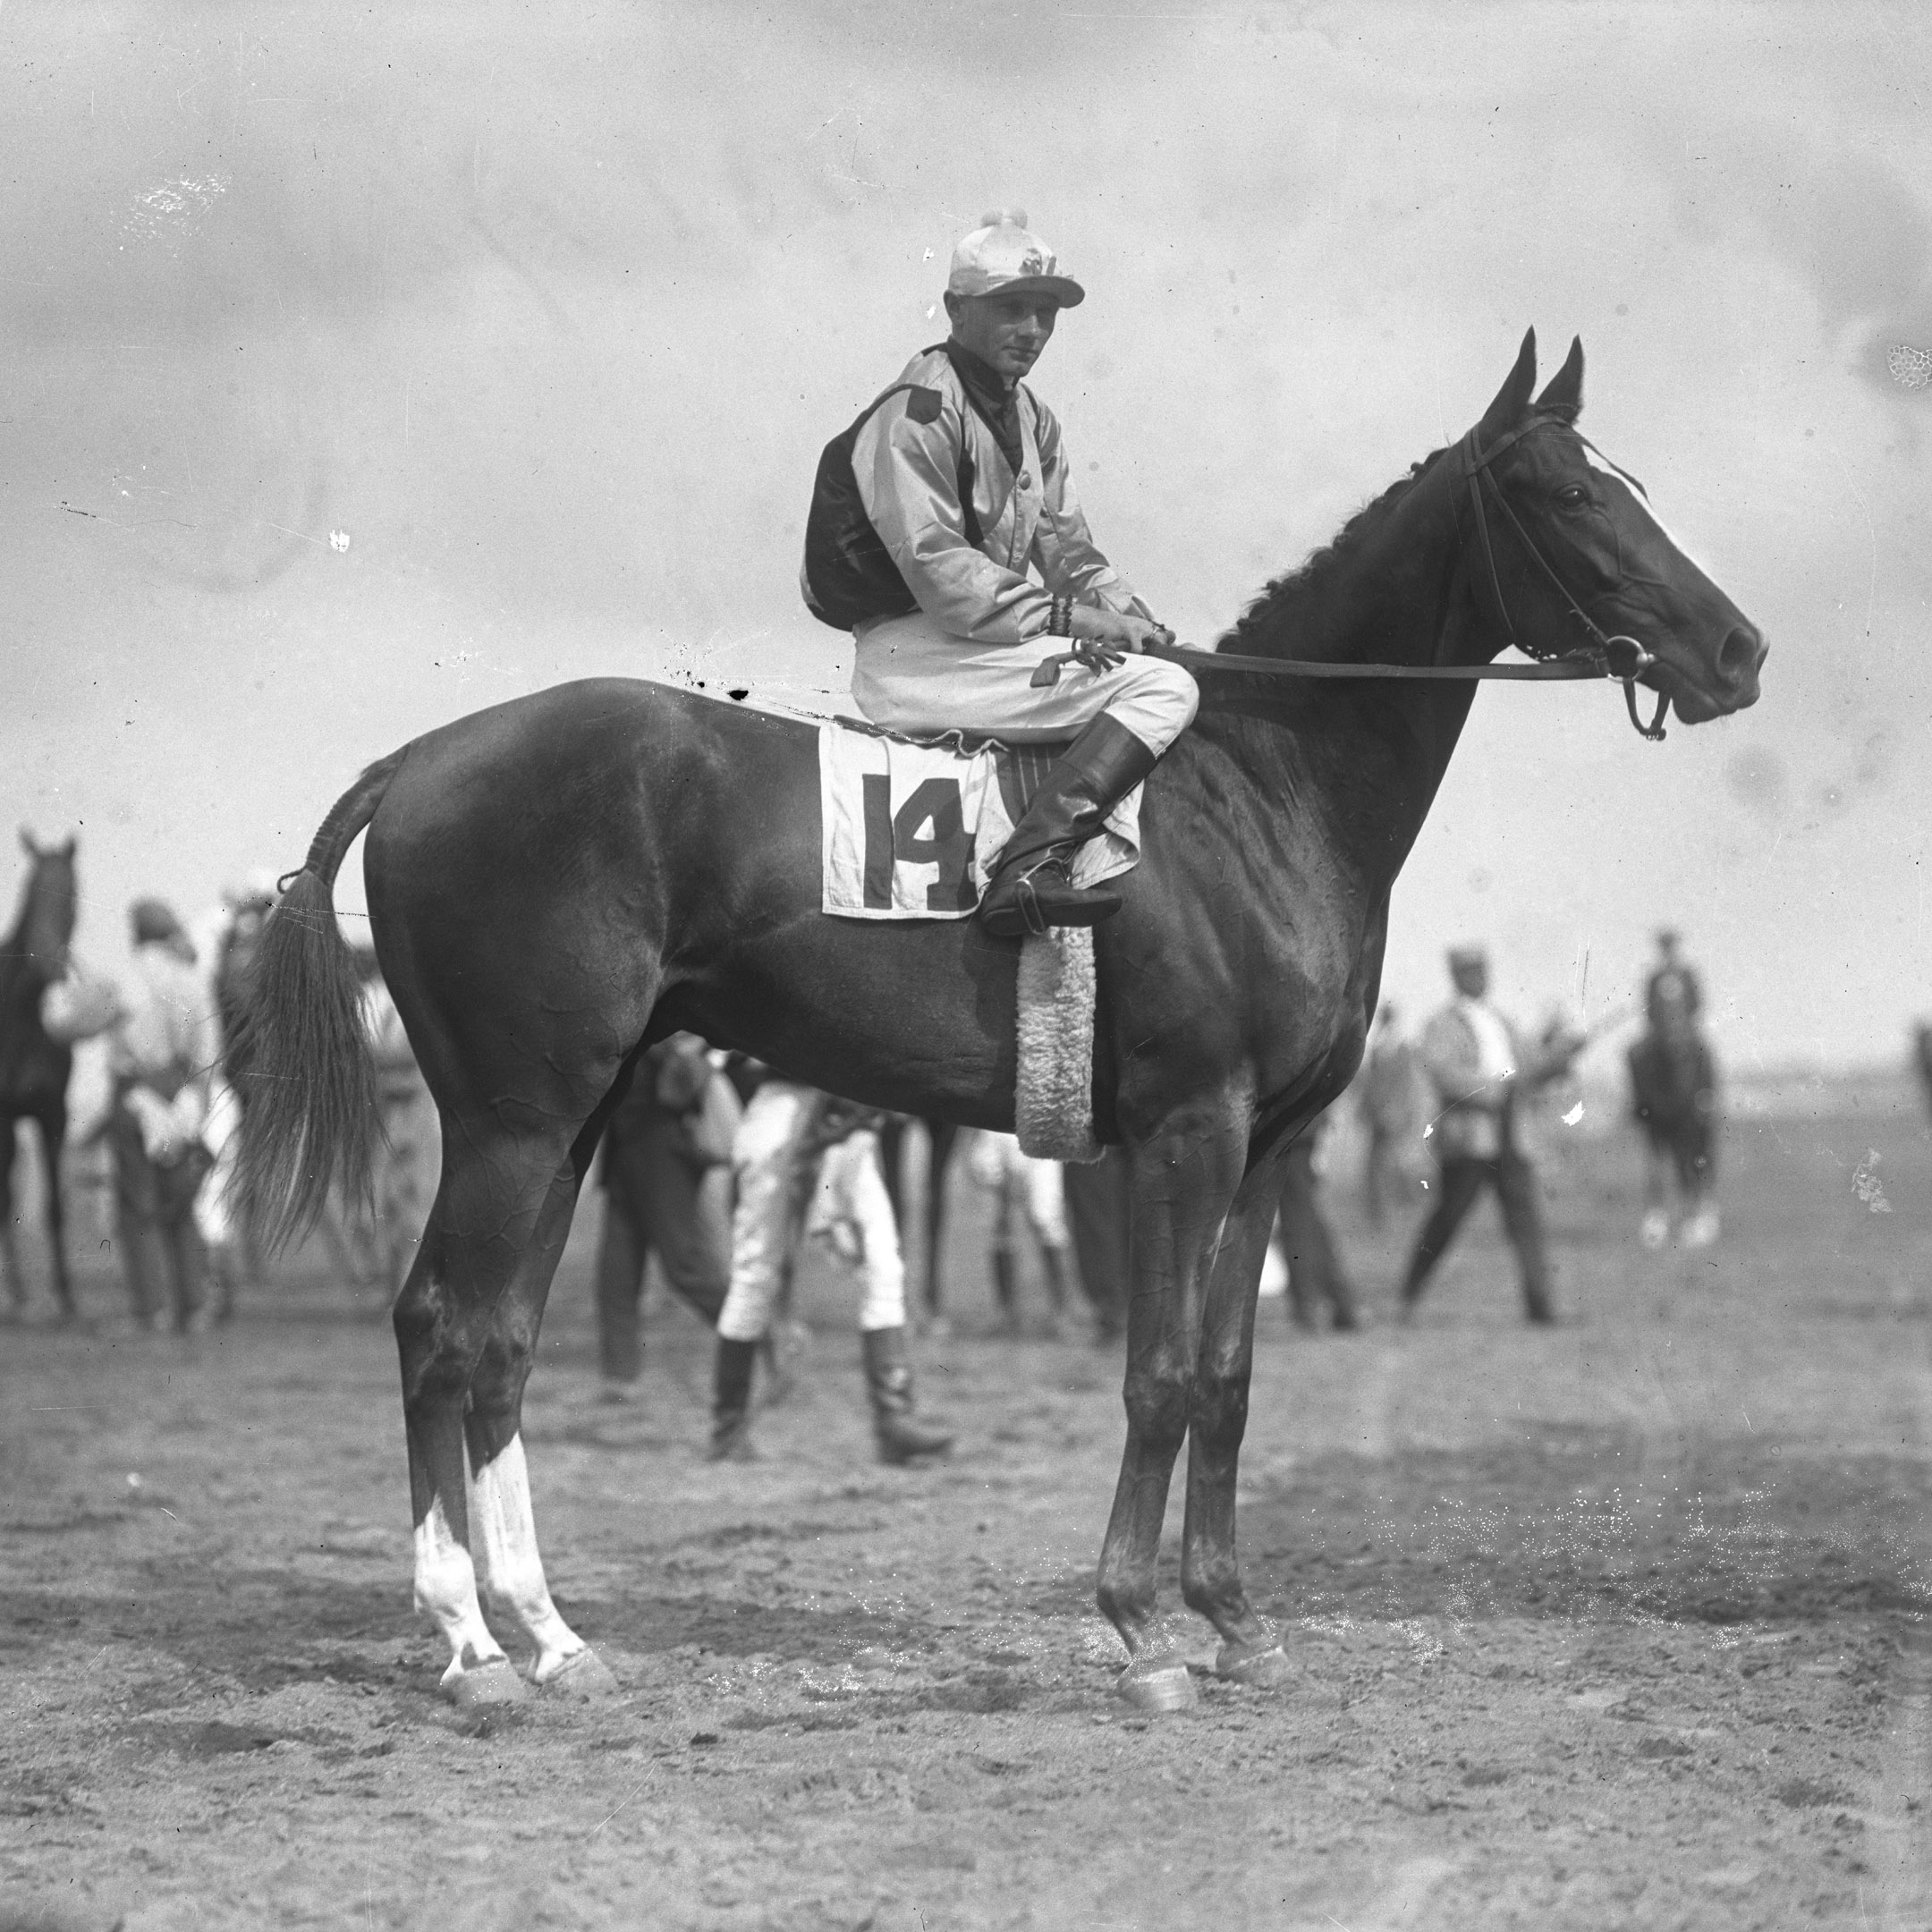 Sarazen with Earl Sande up, undated (Keeneland Library Cook Collection)